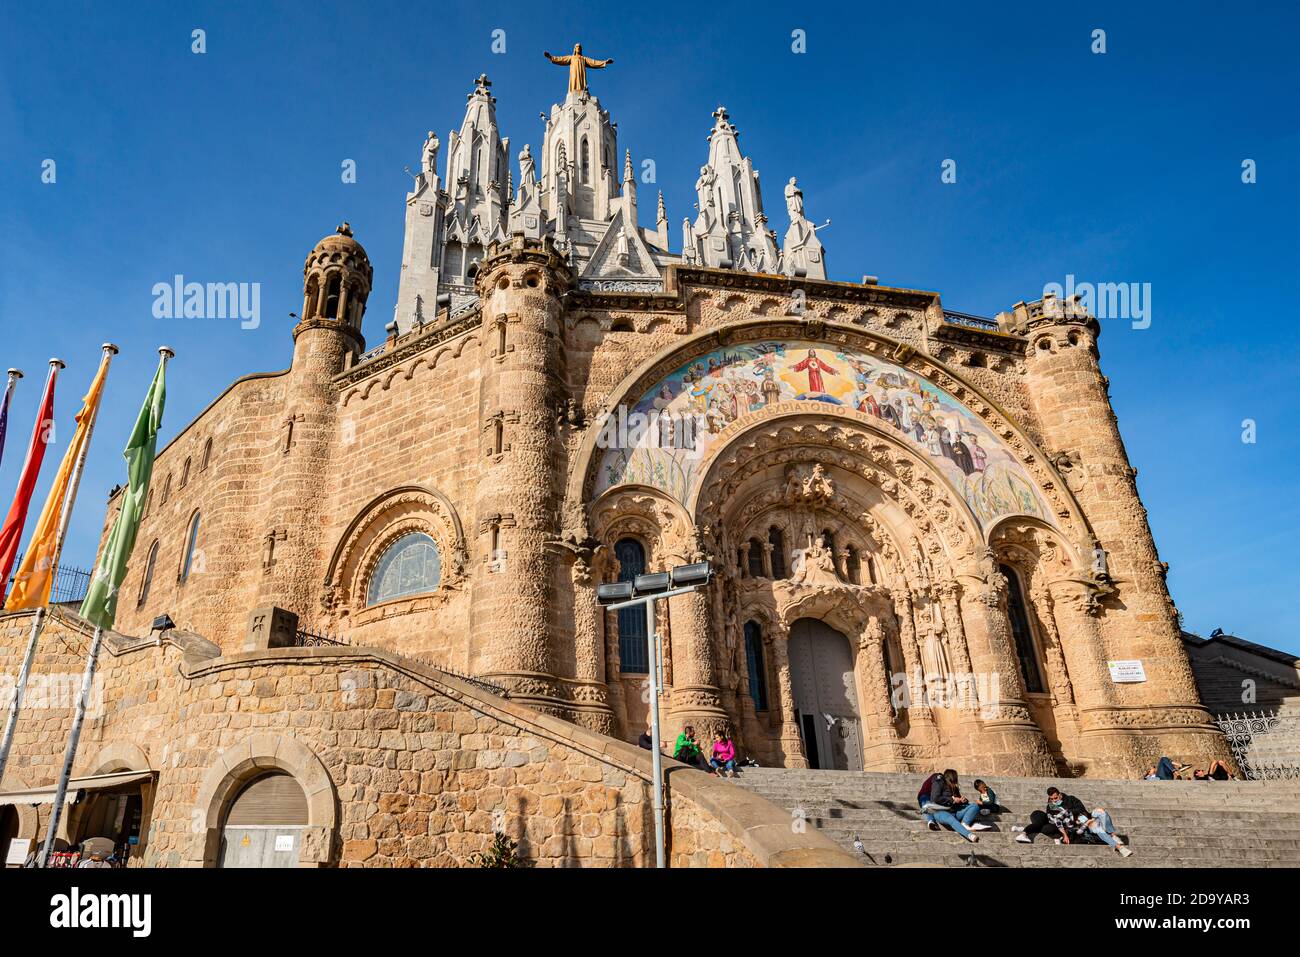 BARCELONA, SPAIN - NOV 07: People relaxing in front of Tibidabo church on mountain in Barcelona Stock Photo